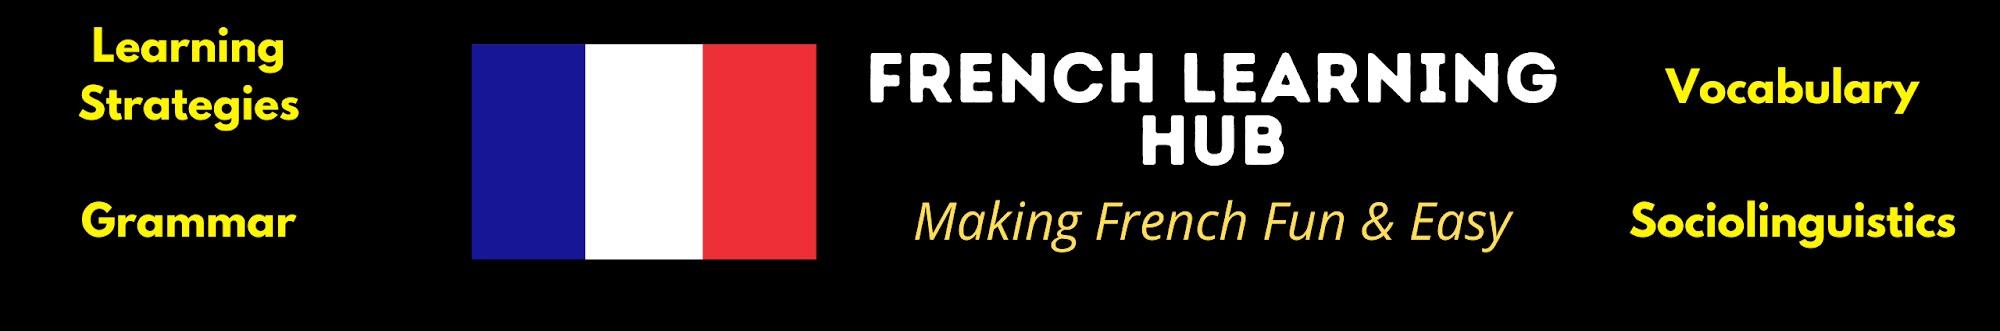 French Learning Hub